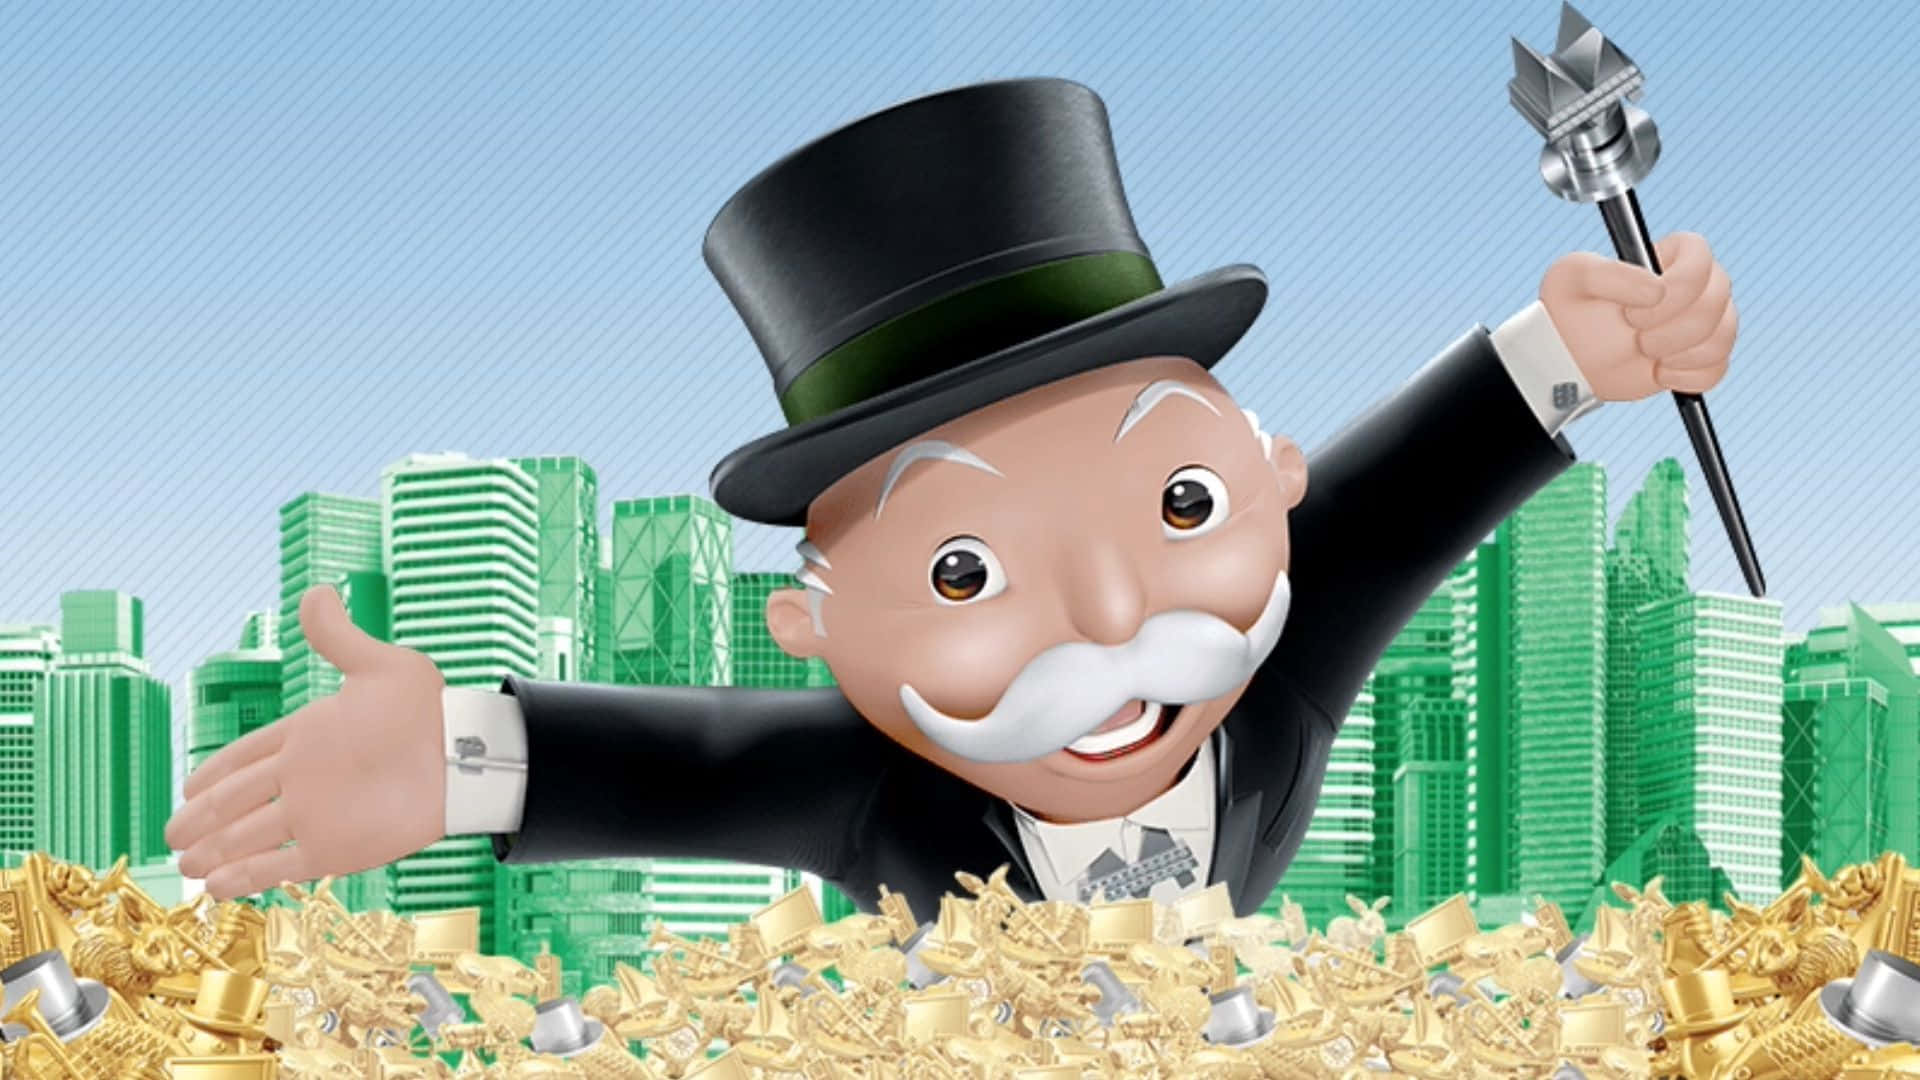 Rolling in the dough: Monopoly Man enjoying the finer things in life